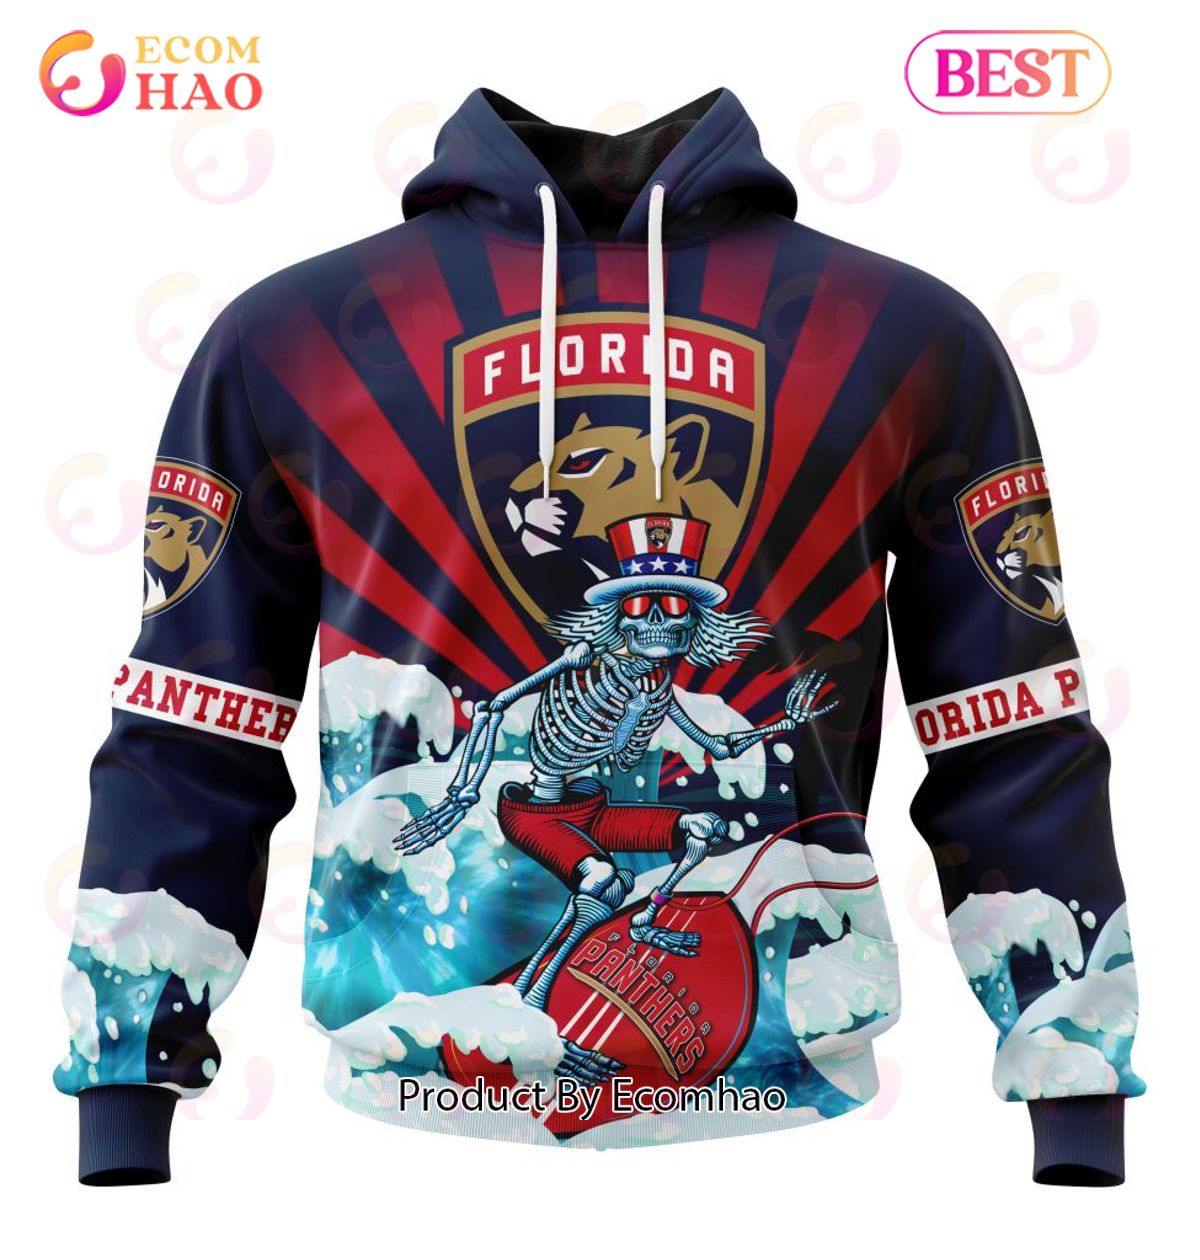 NHL Florida Panthers Reverse Retro Kits 2022 3D Hoodie - Ecomhao Store